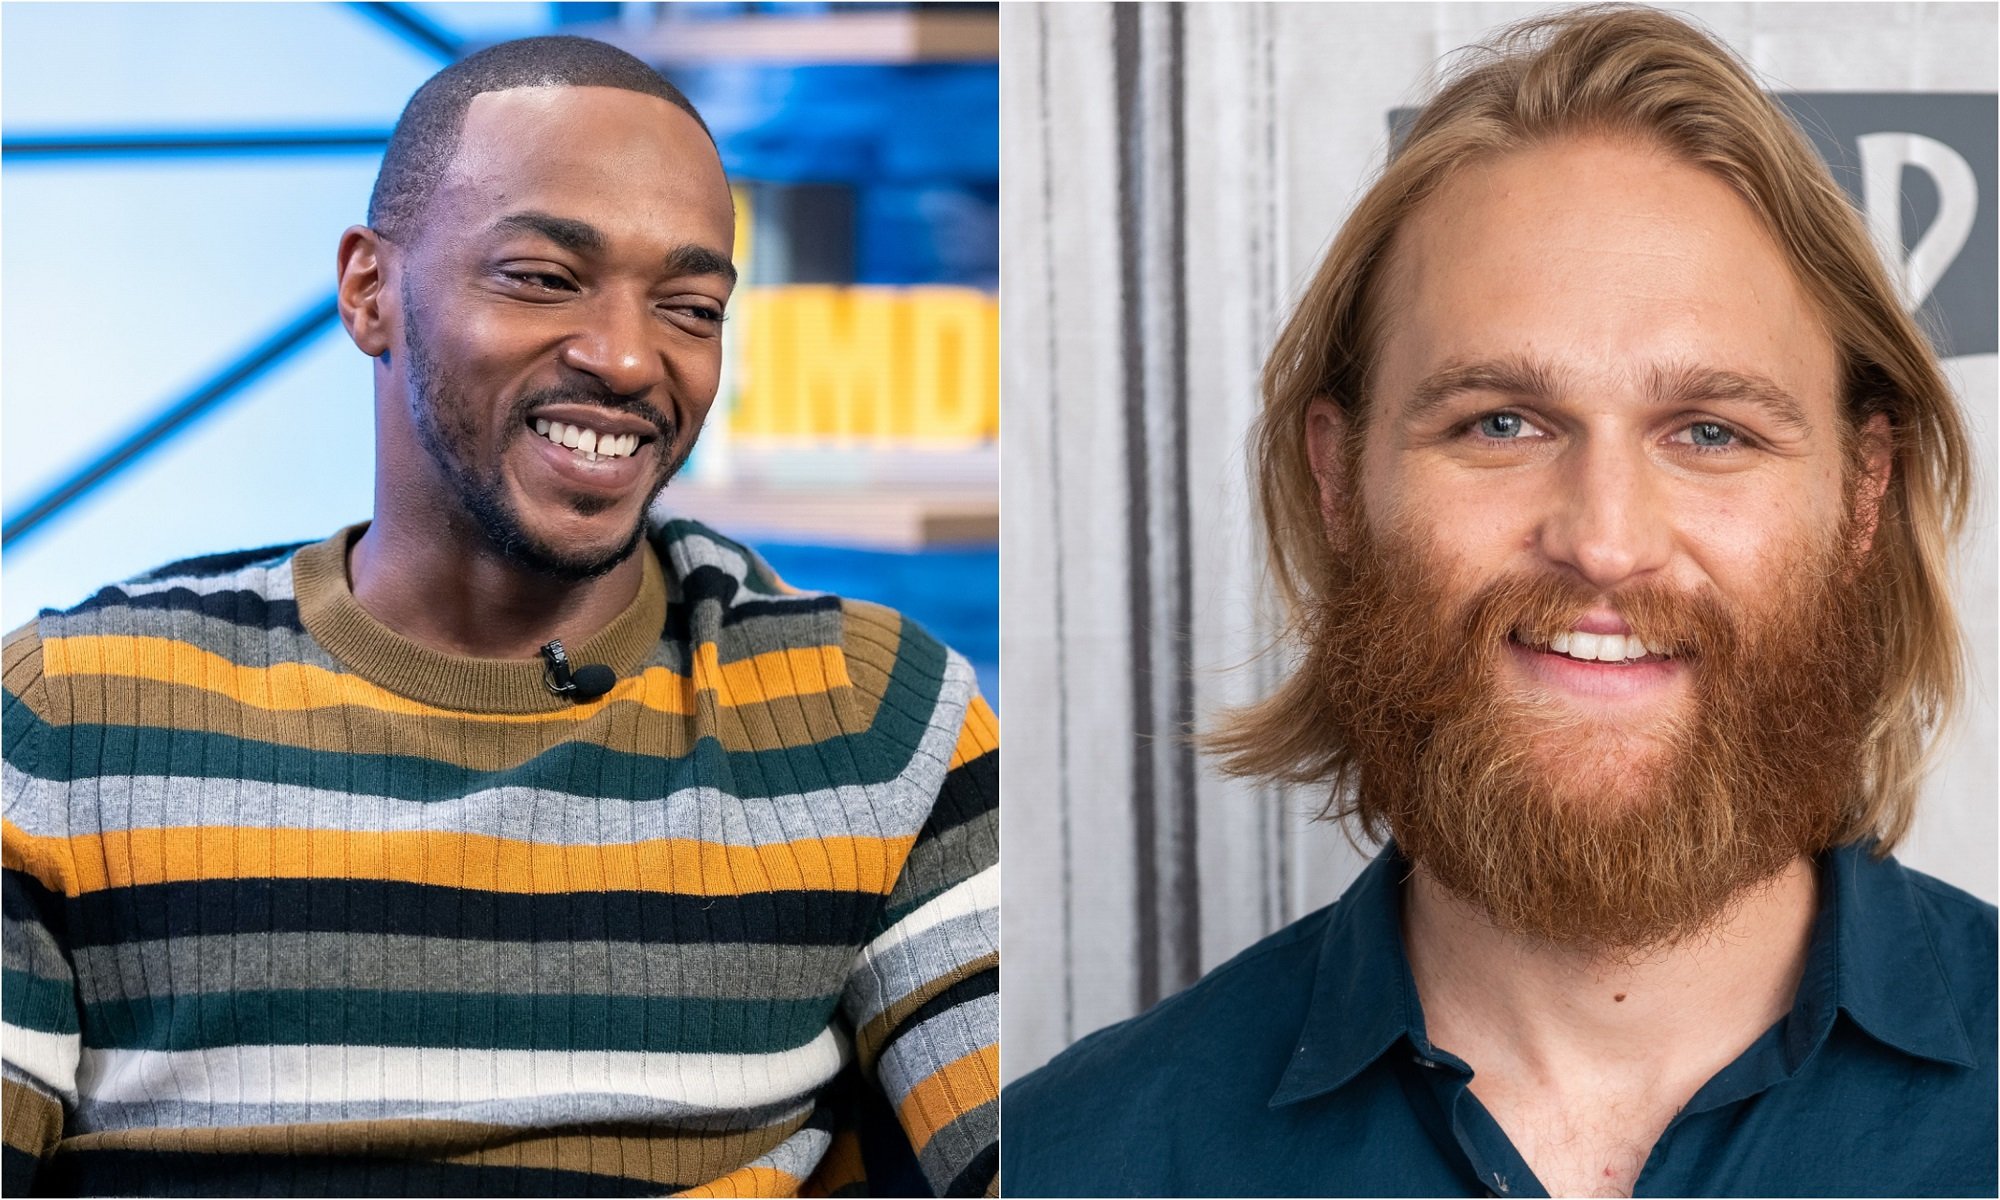 A joined photo of actor Anthony Mackie on 'The IMDb Show' in 2019 and Wyatt Russell at BUILD Studio in 2019